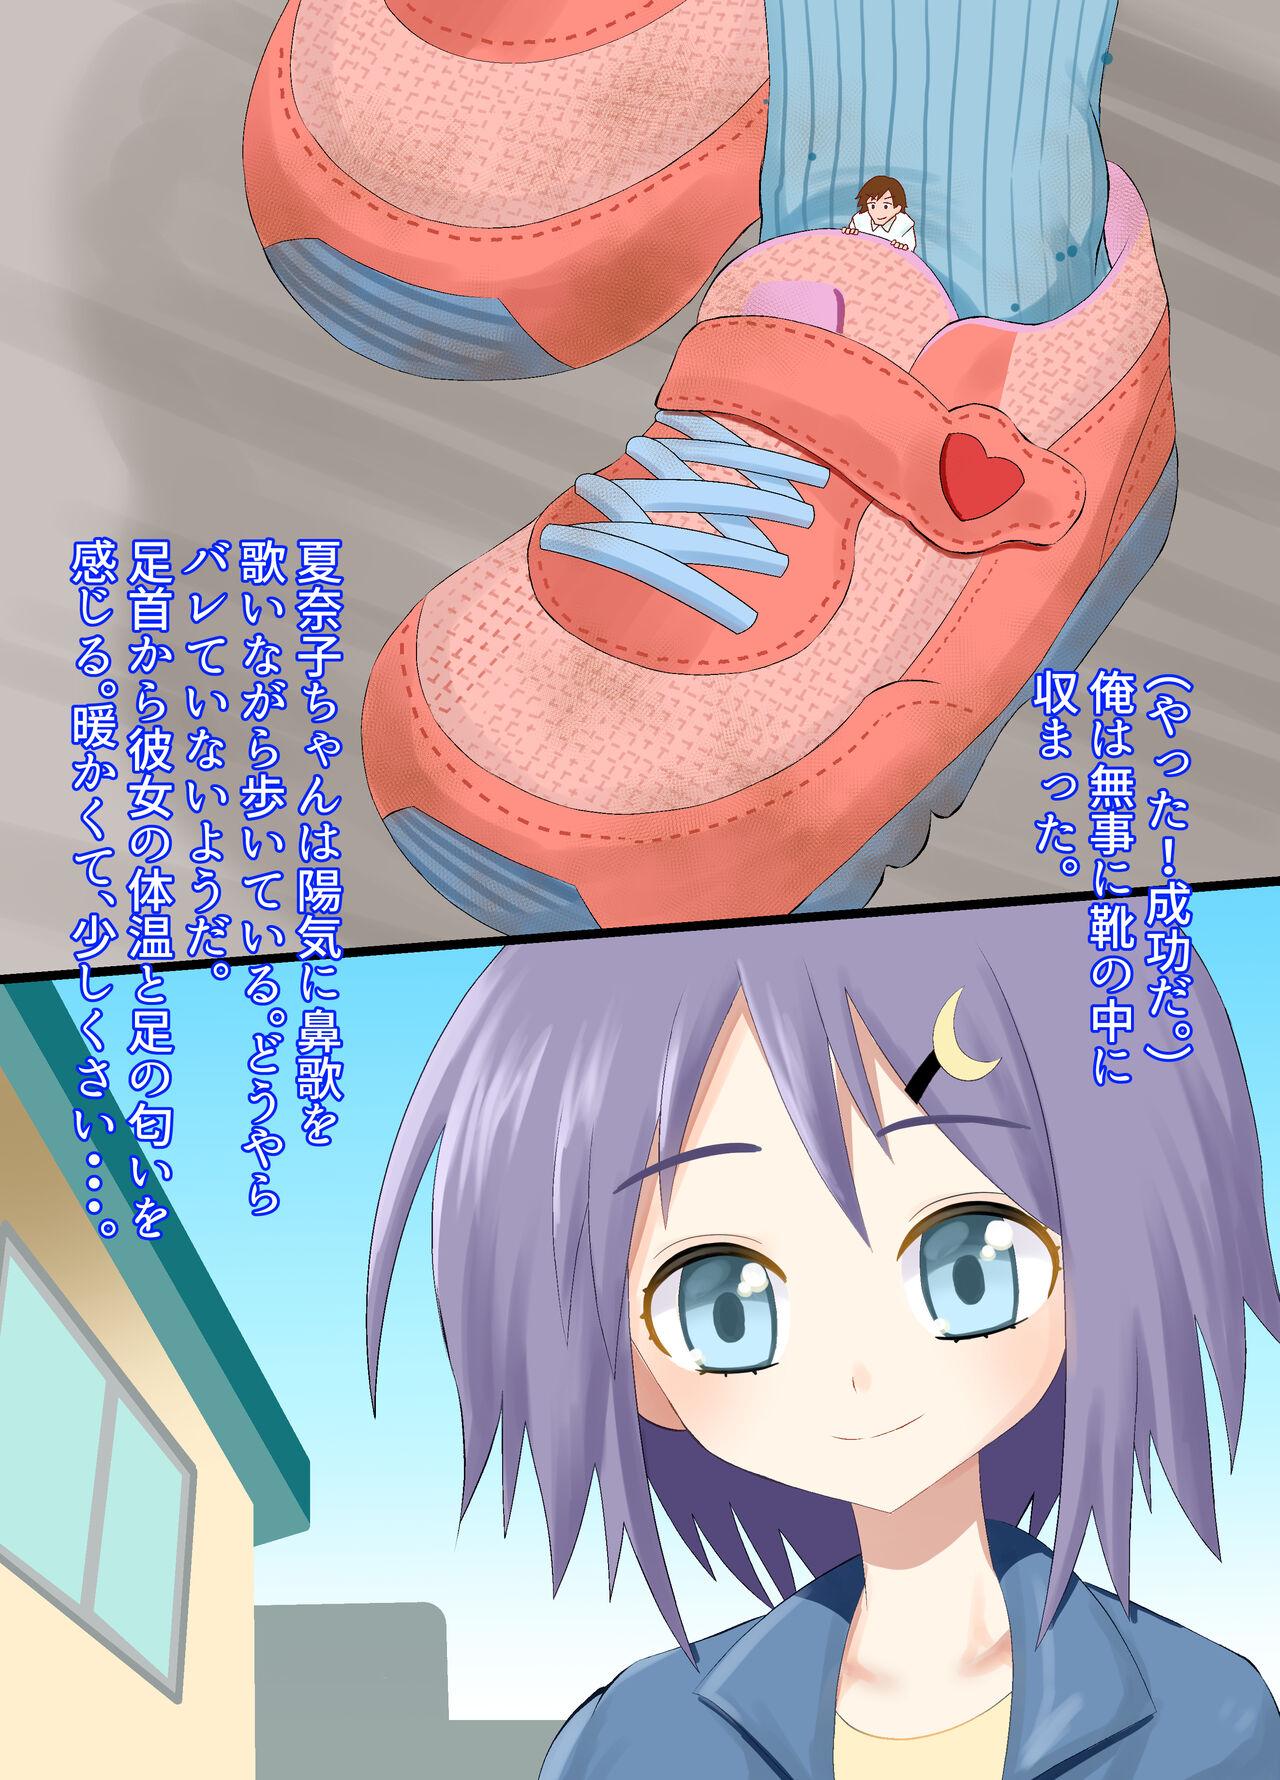 Facebook A CG collection of getting smaller and being stepped on by a girl - Original Cavalgando - Page 7